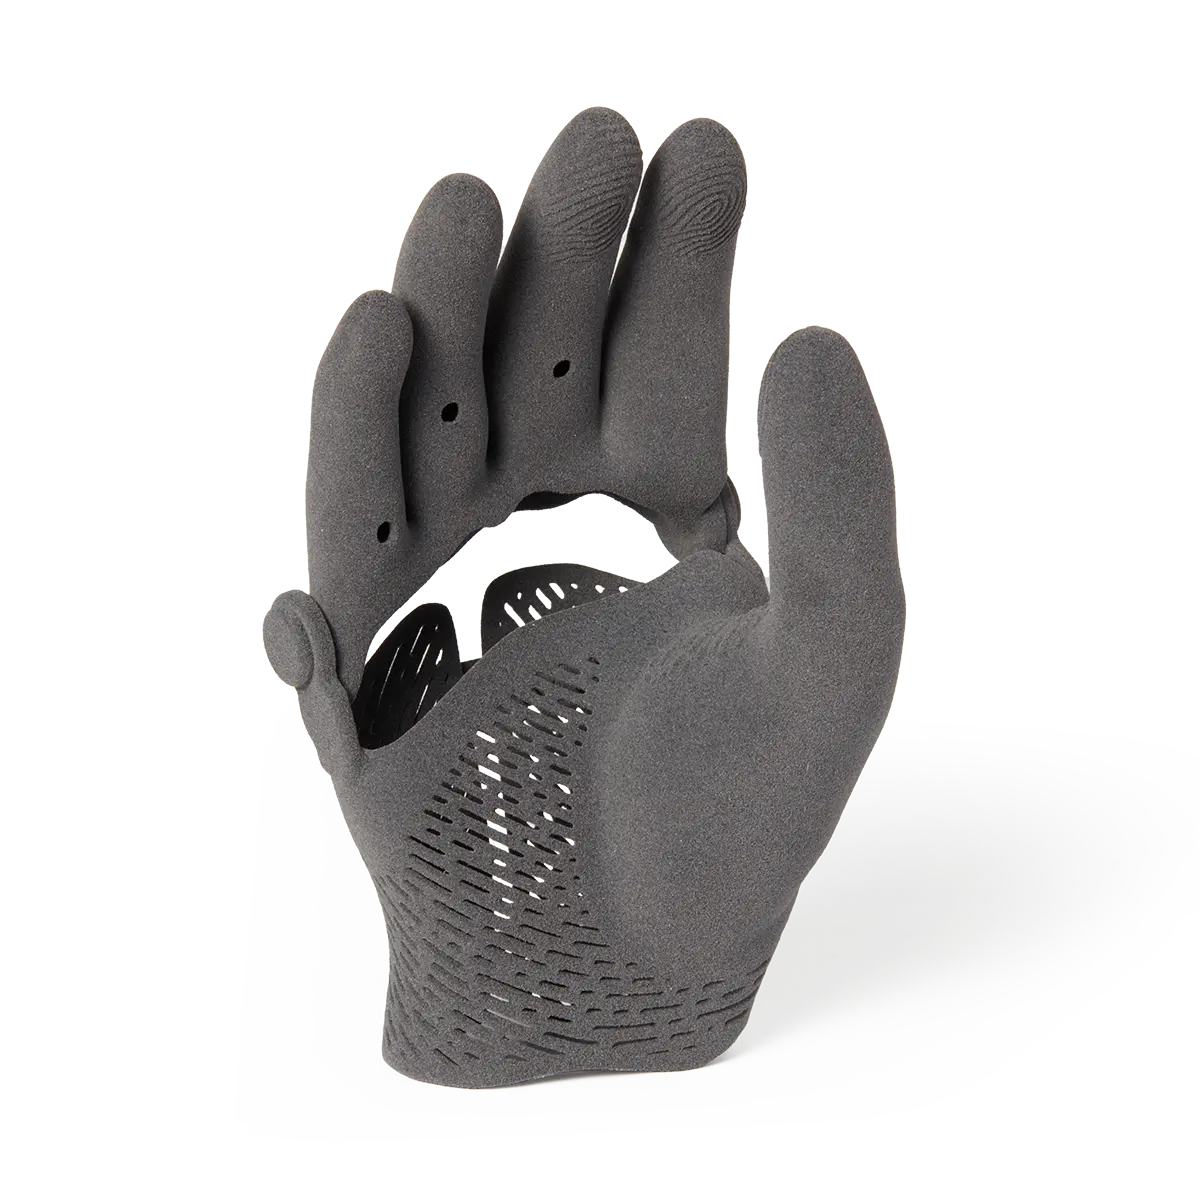 tpu 90a powder 3D printed prosthetic hand covering